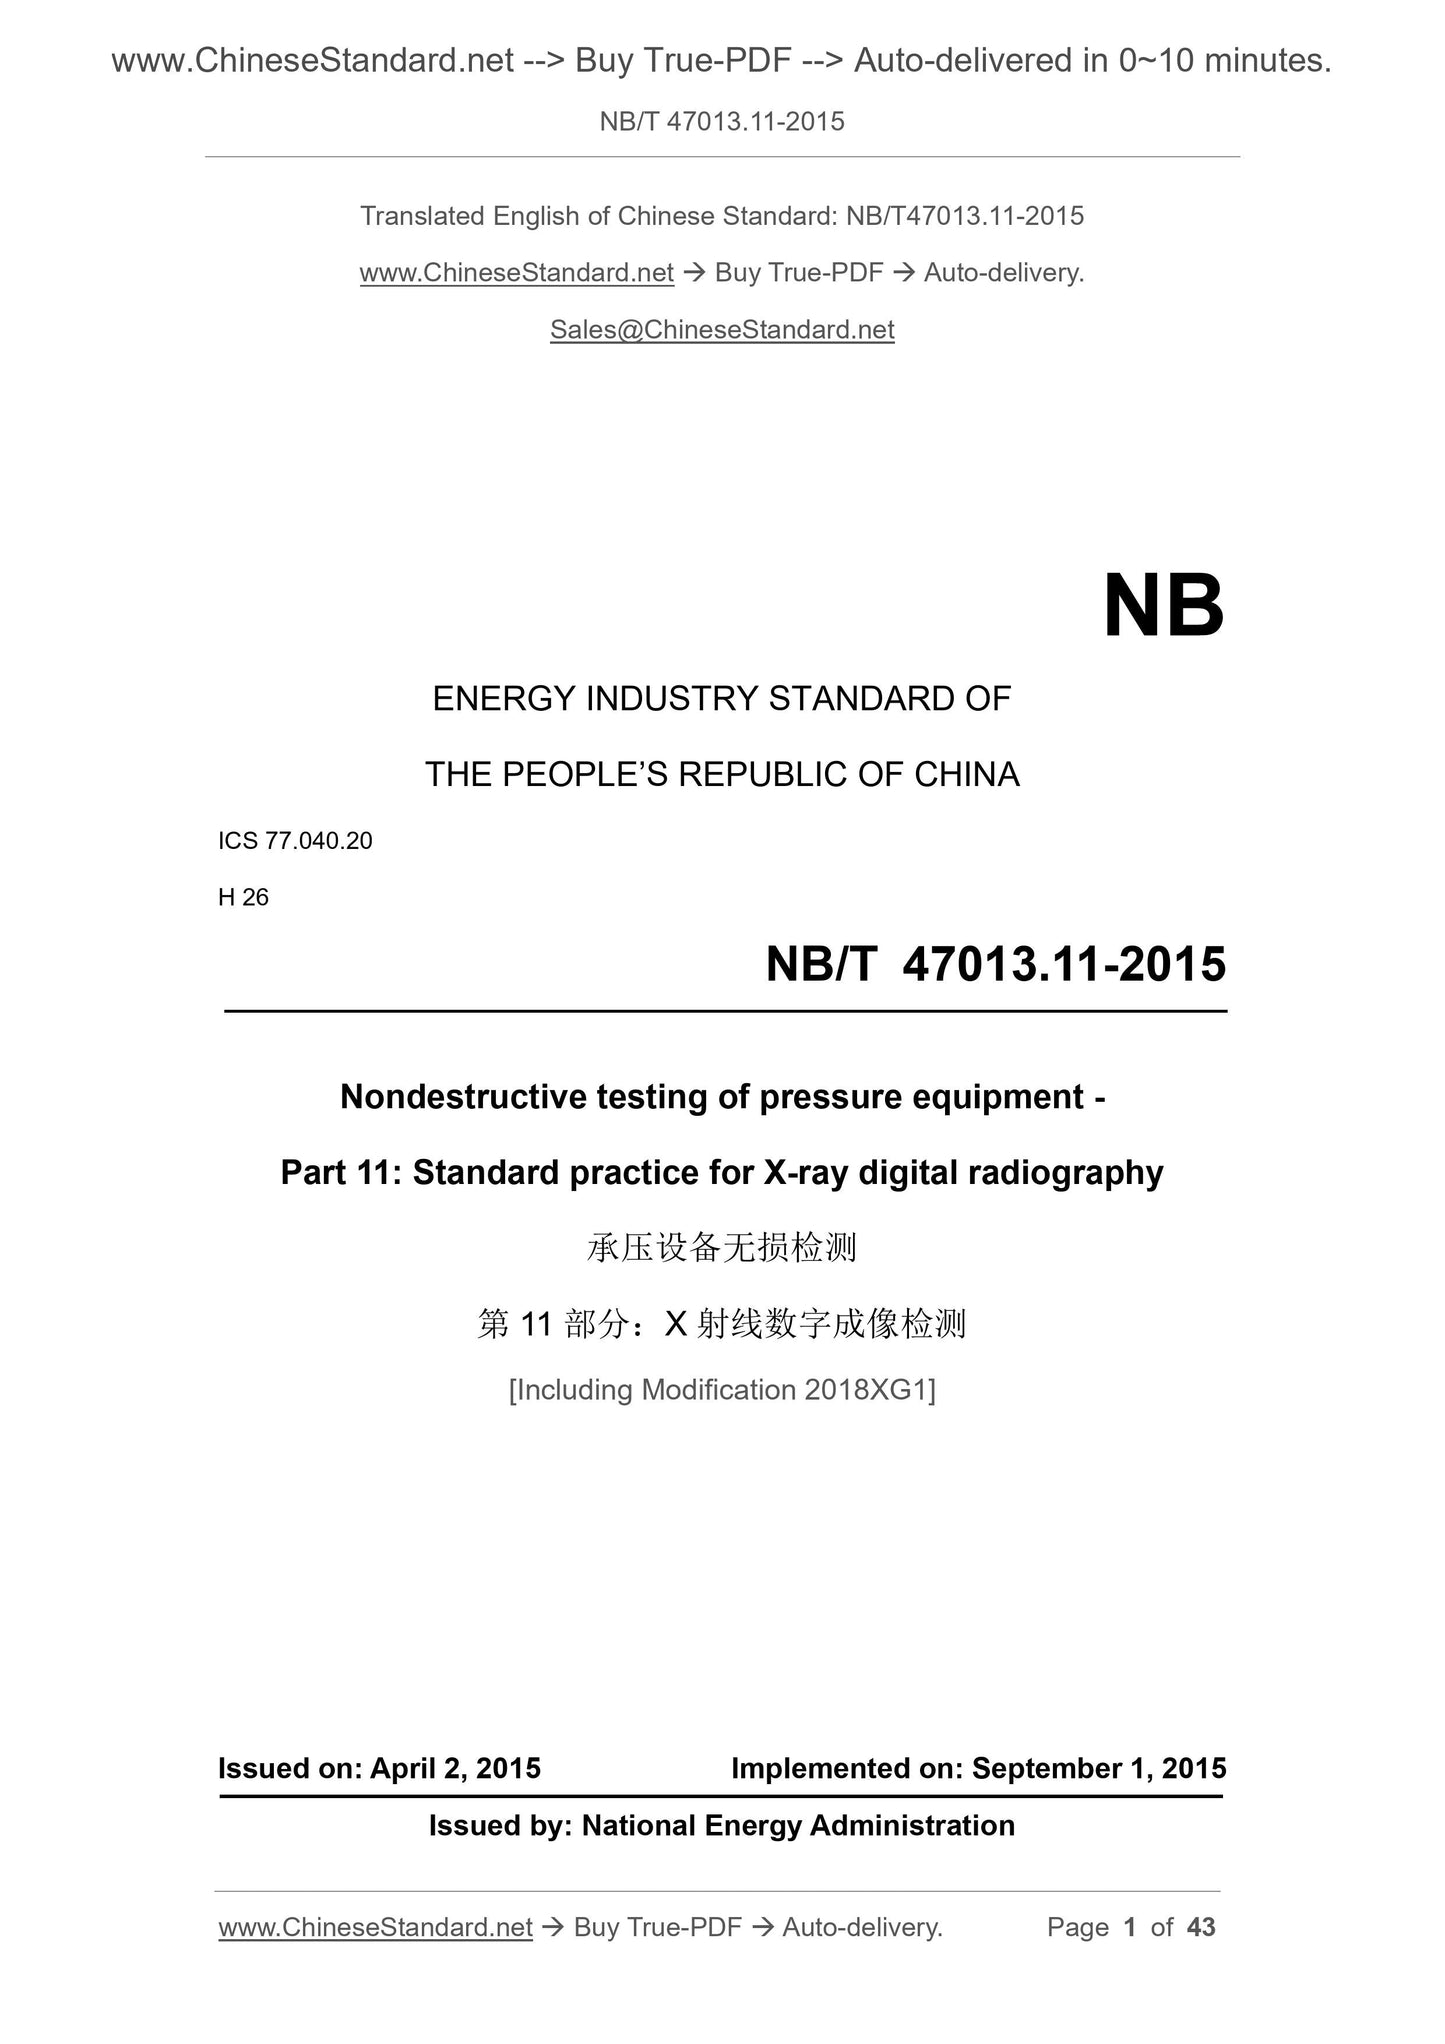 NB/T 47013.11-2015 Page 1